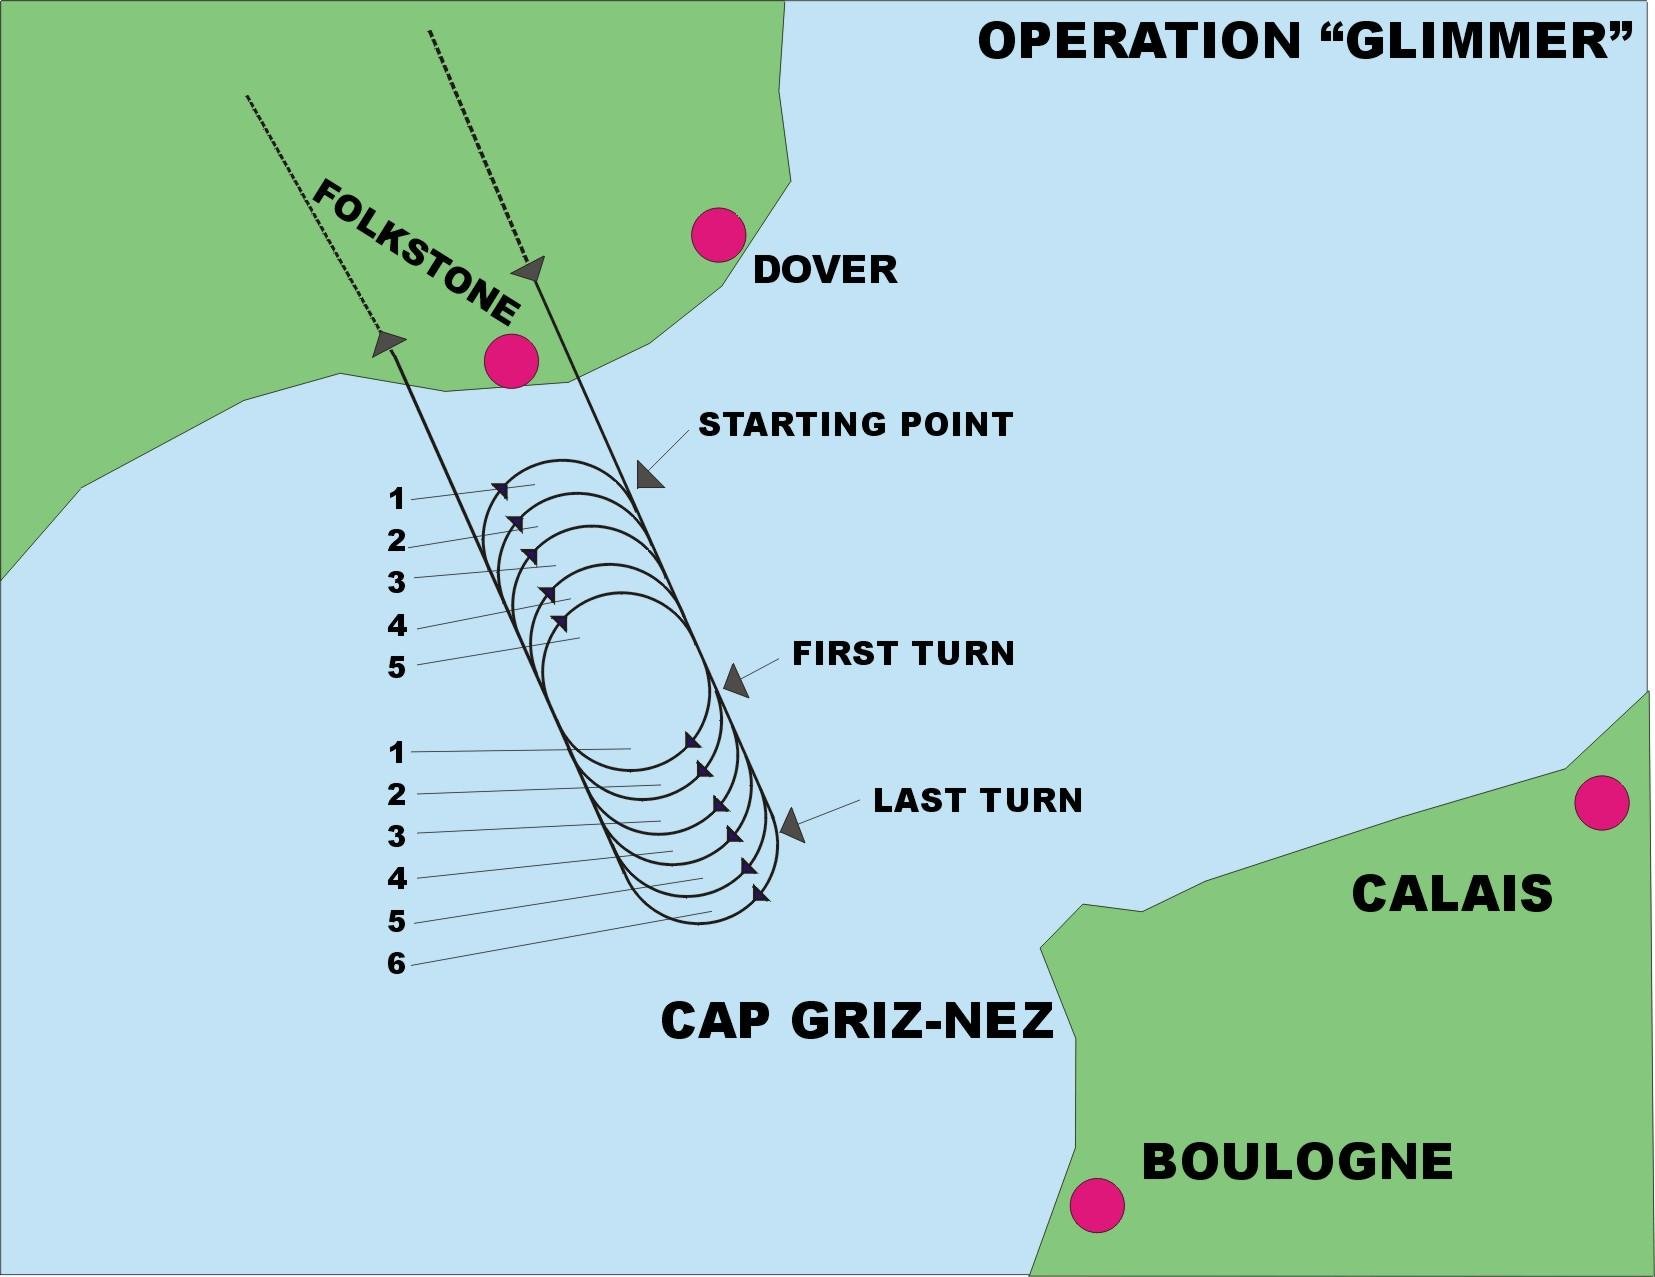 A schematic plan showing the flight path for operation 'Glimmer'